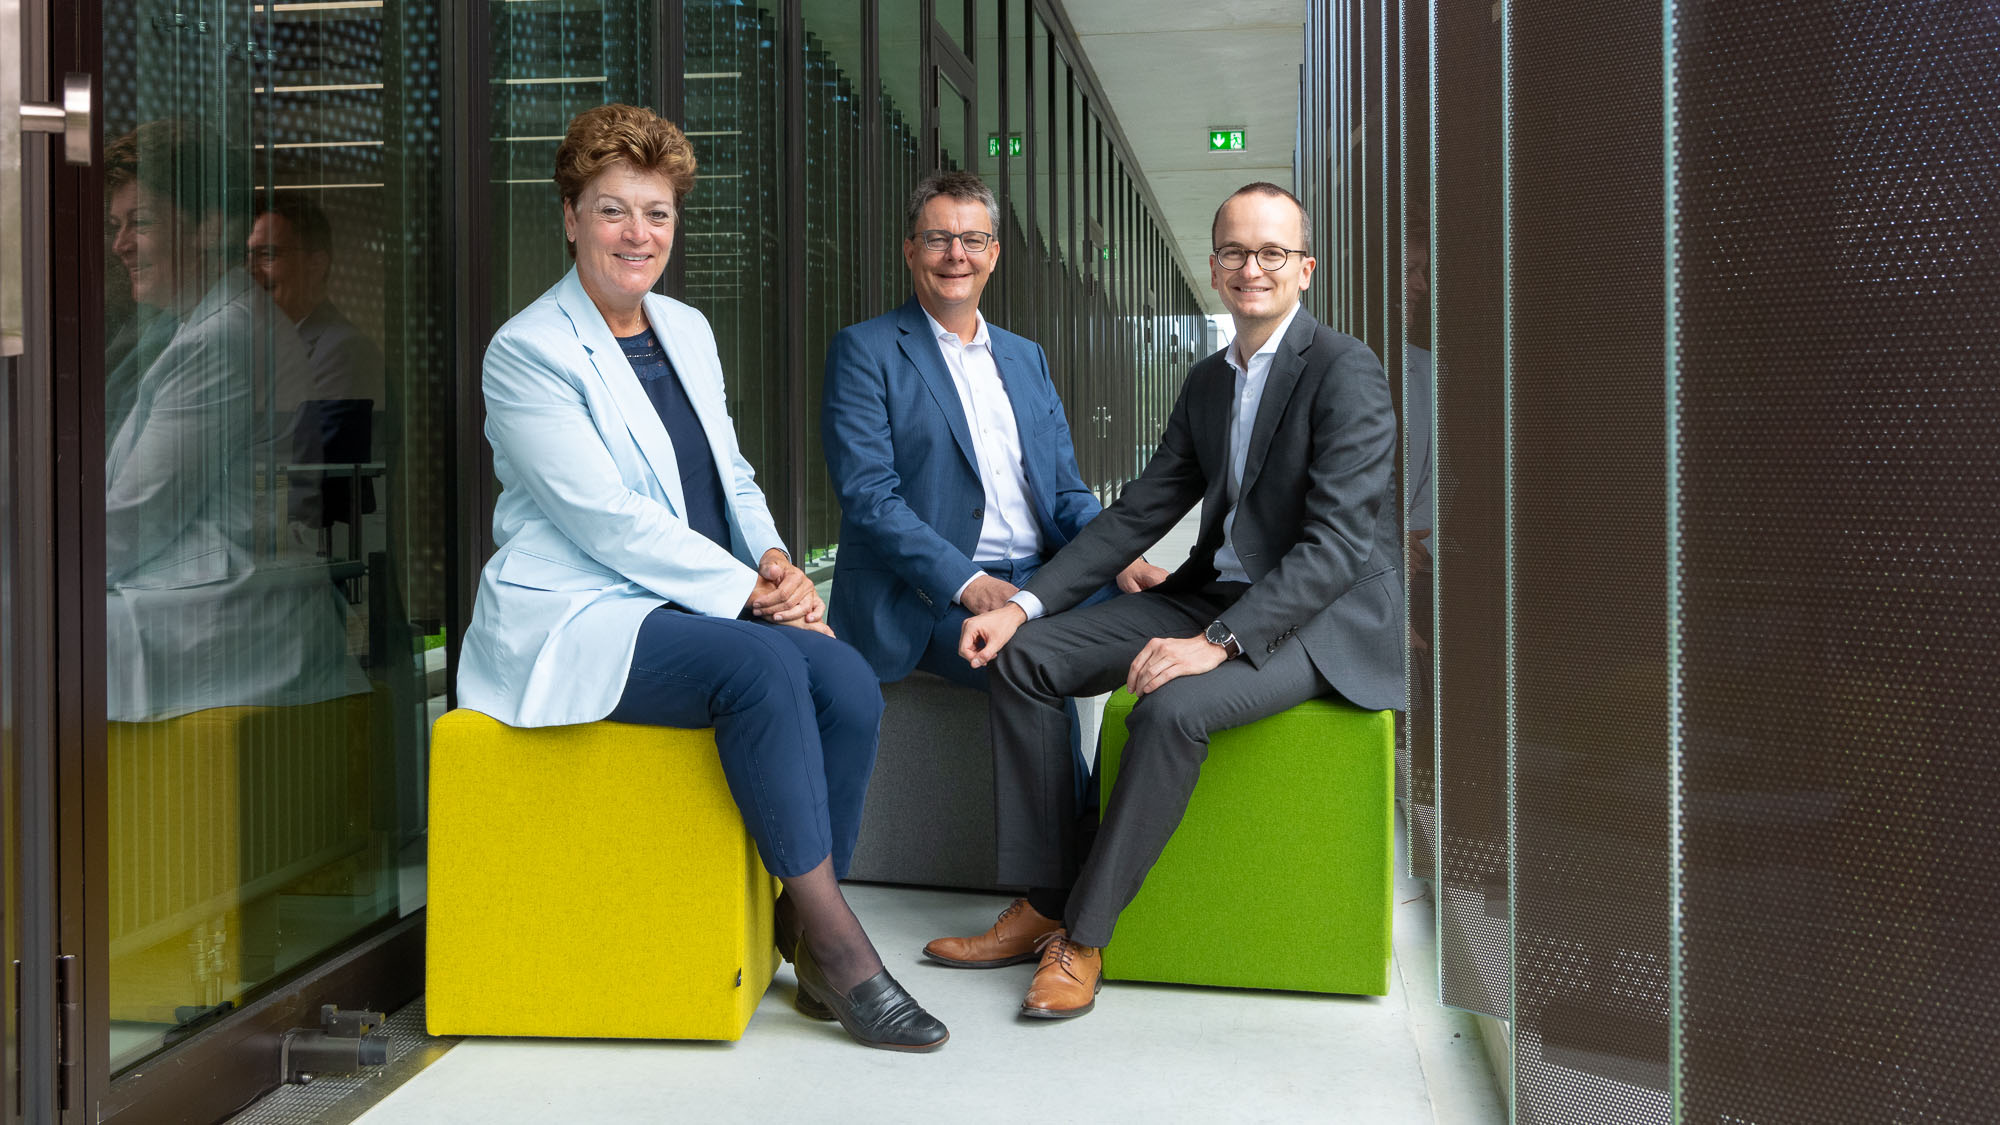 Michael Schaepman with Government Councillors of the Canton of Zurich Silvia Steiner and Martin Neukom in the new laboratory building on Irchel Campus, 27 August 2021 (Photo: Frank Brüderli)